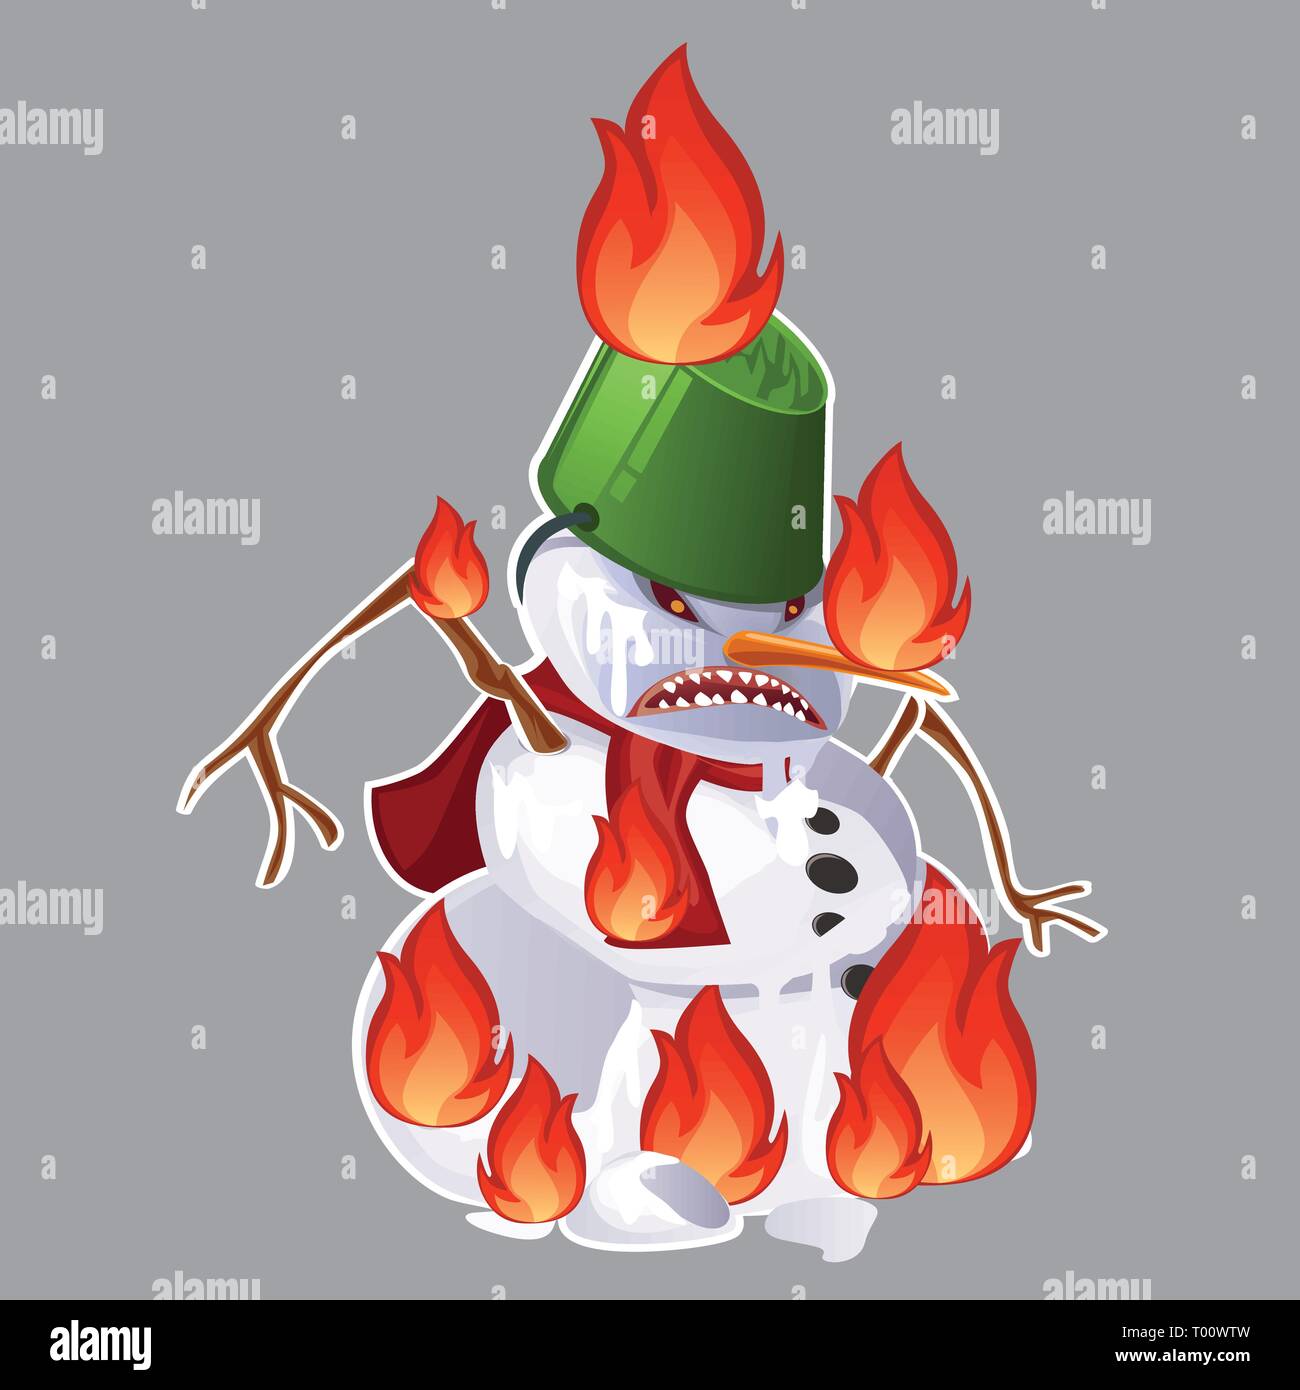 Angry aggressive toothy snowman is burning in the fire isolated on grey background. Vector cartoon close-up illustration. Stock Vector